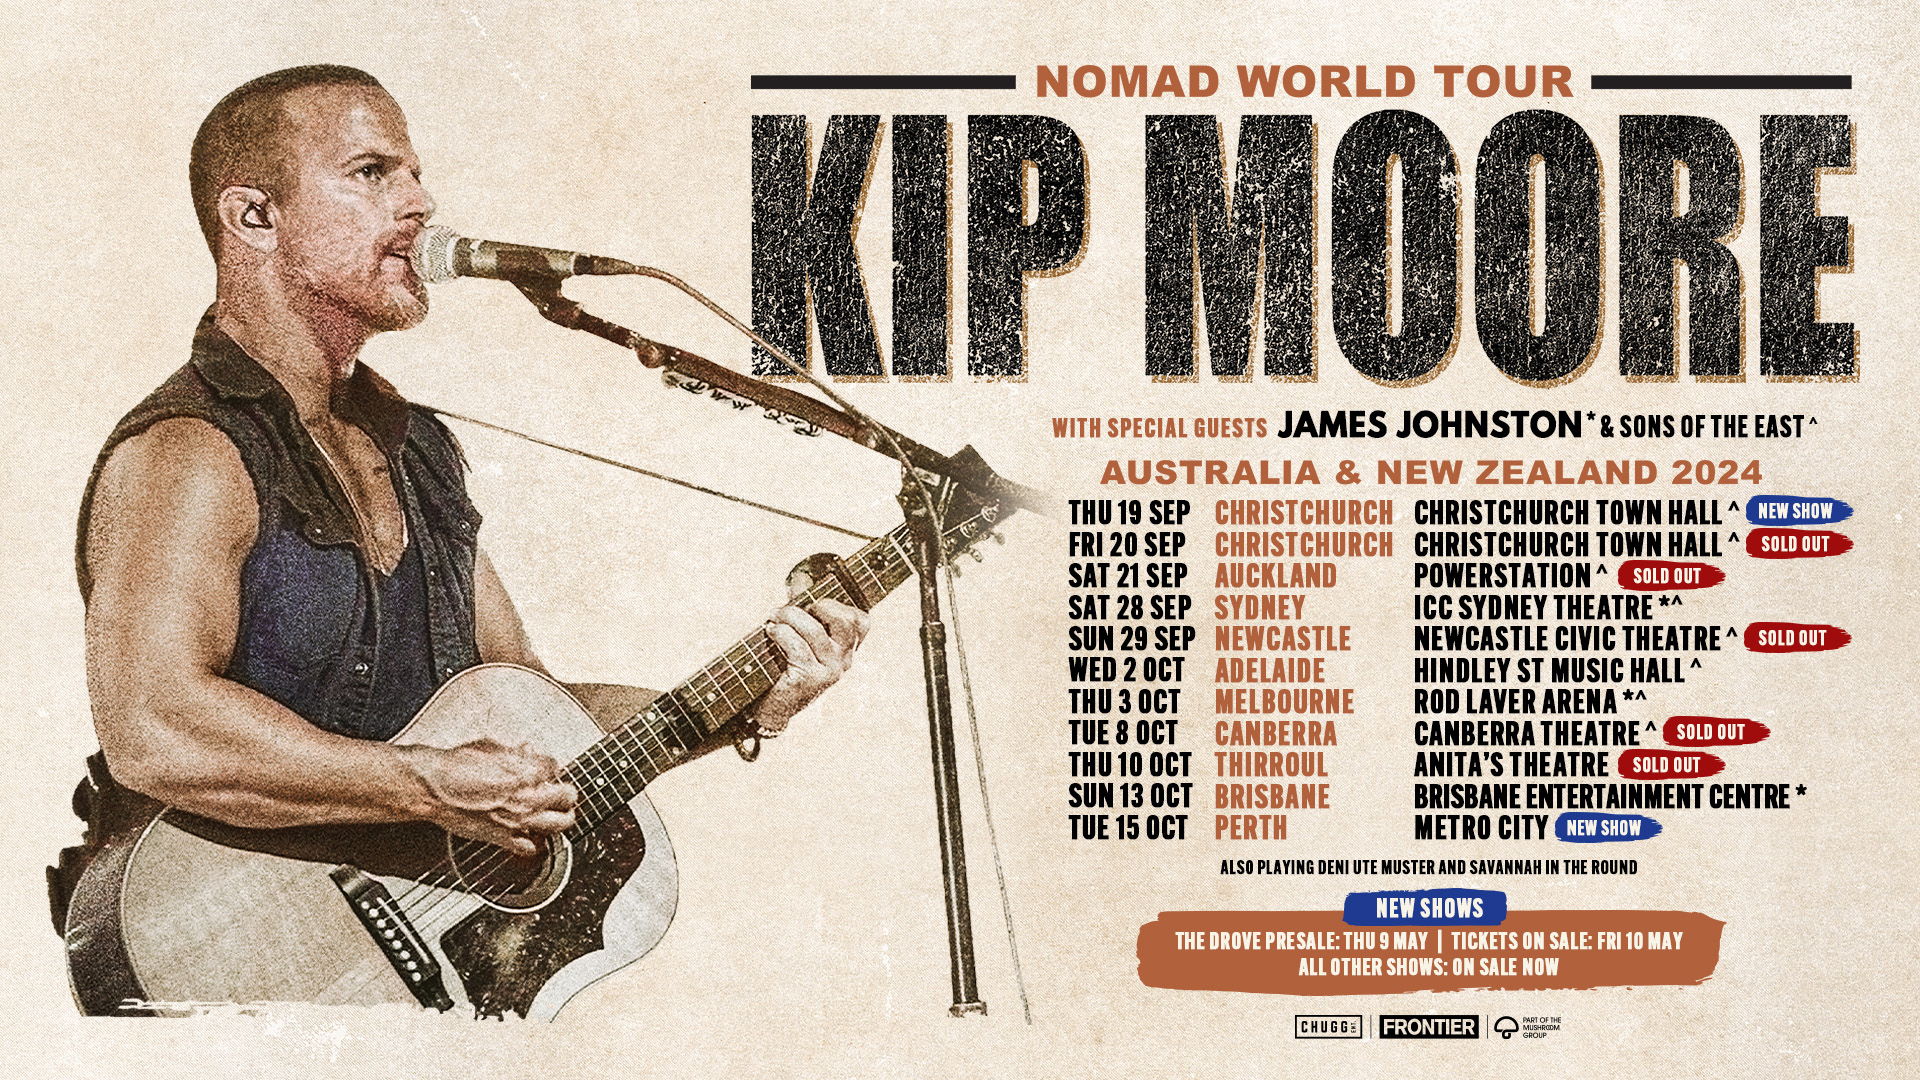 KIP MOORE (US) ADDS NEW PERTH & CHRISTCHURCH DATES TO NOMAD WORLD TOUR THIS SEPTEMBER & OCTOBER